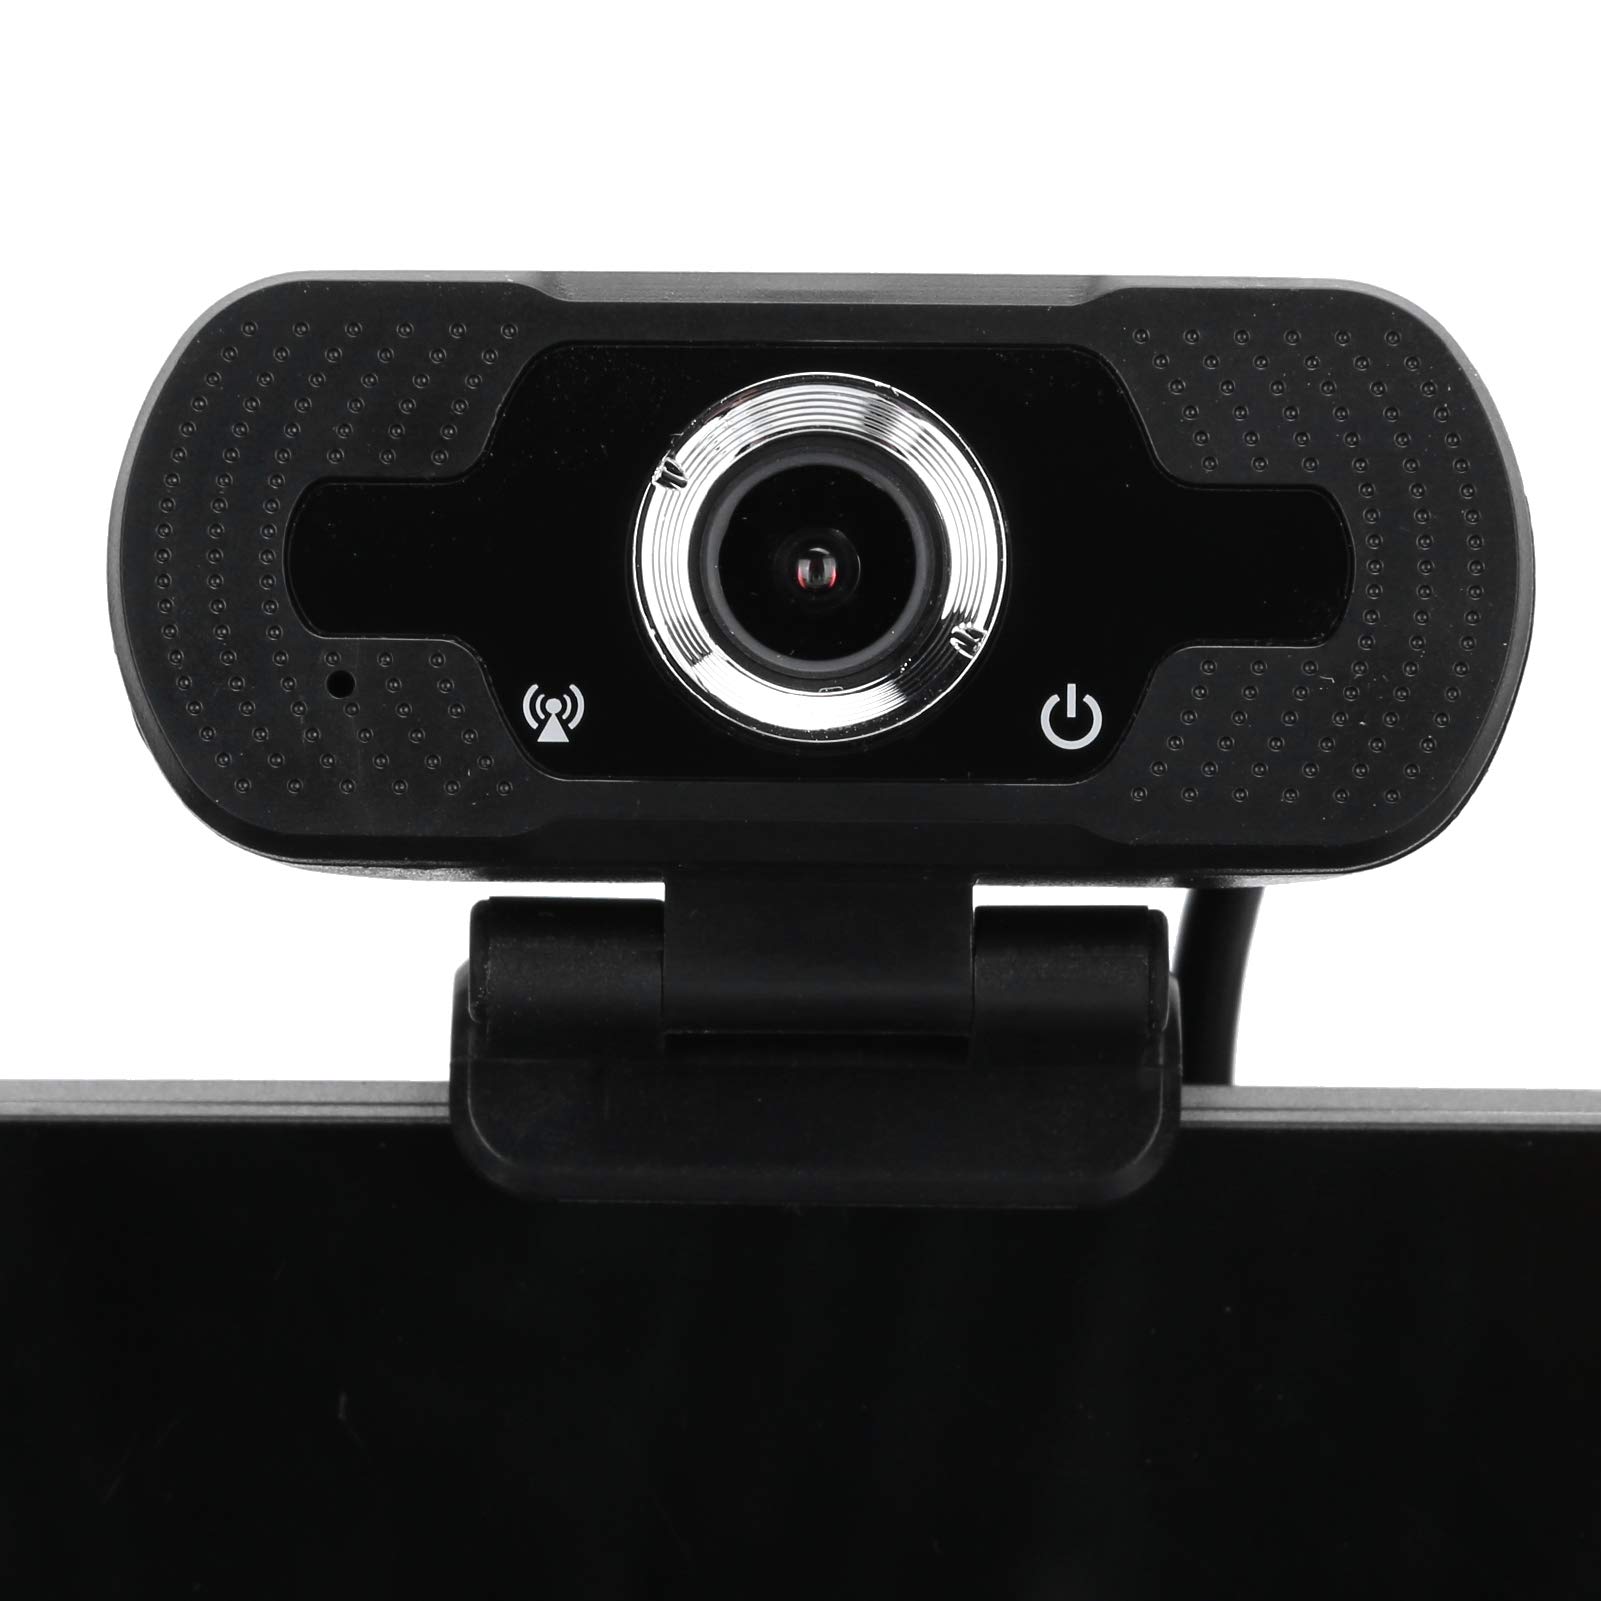 Zyyini Bindpo Web Camera, 1080P High Definition Computer Camera Video Conference USB 2.0 PC Camera, Wide Angle Lens, for Recording, Calling, Gaming